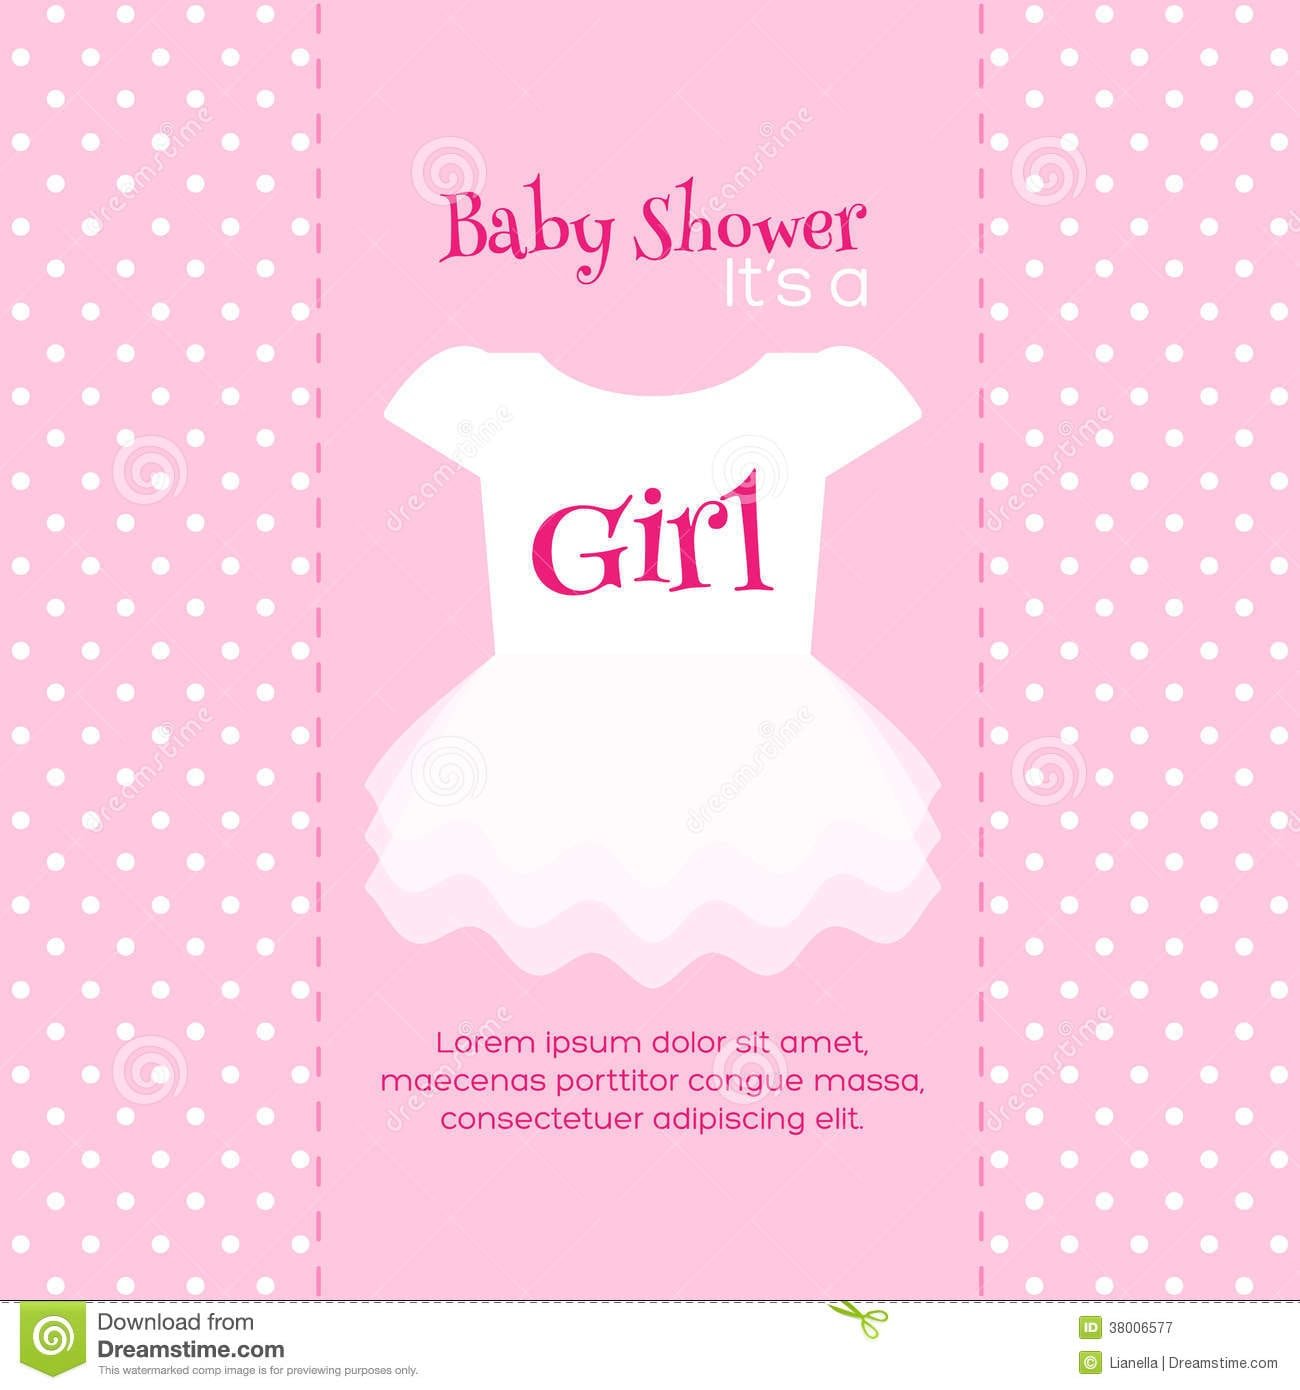 Download Baby Shower Invitations